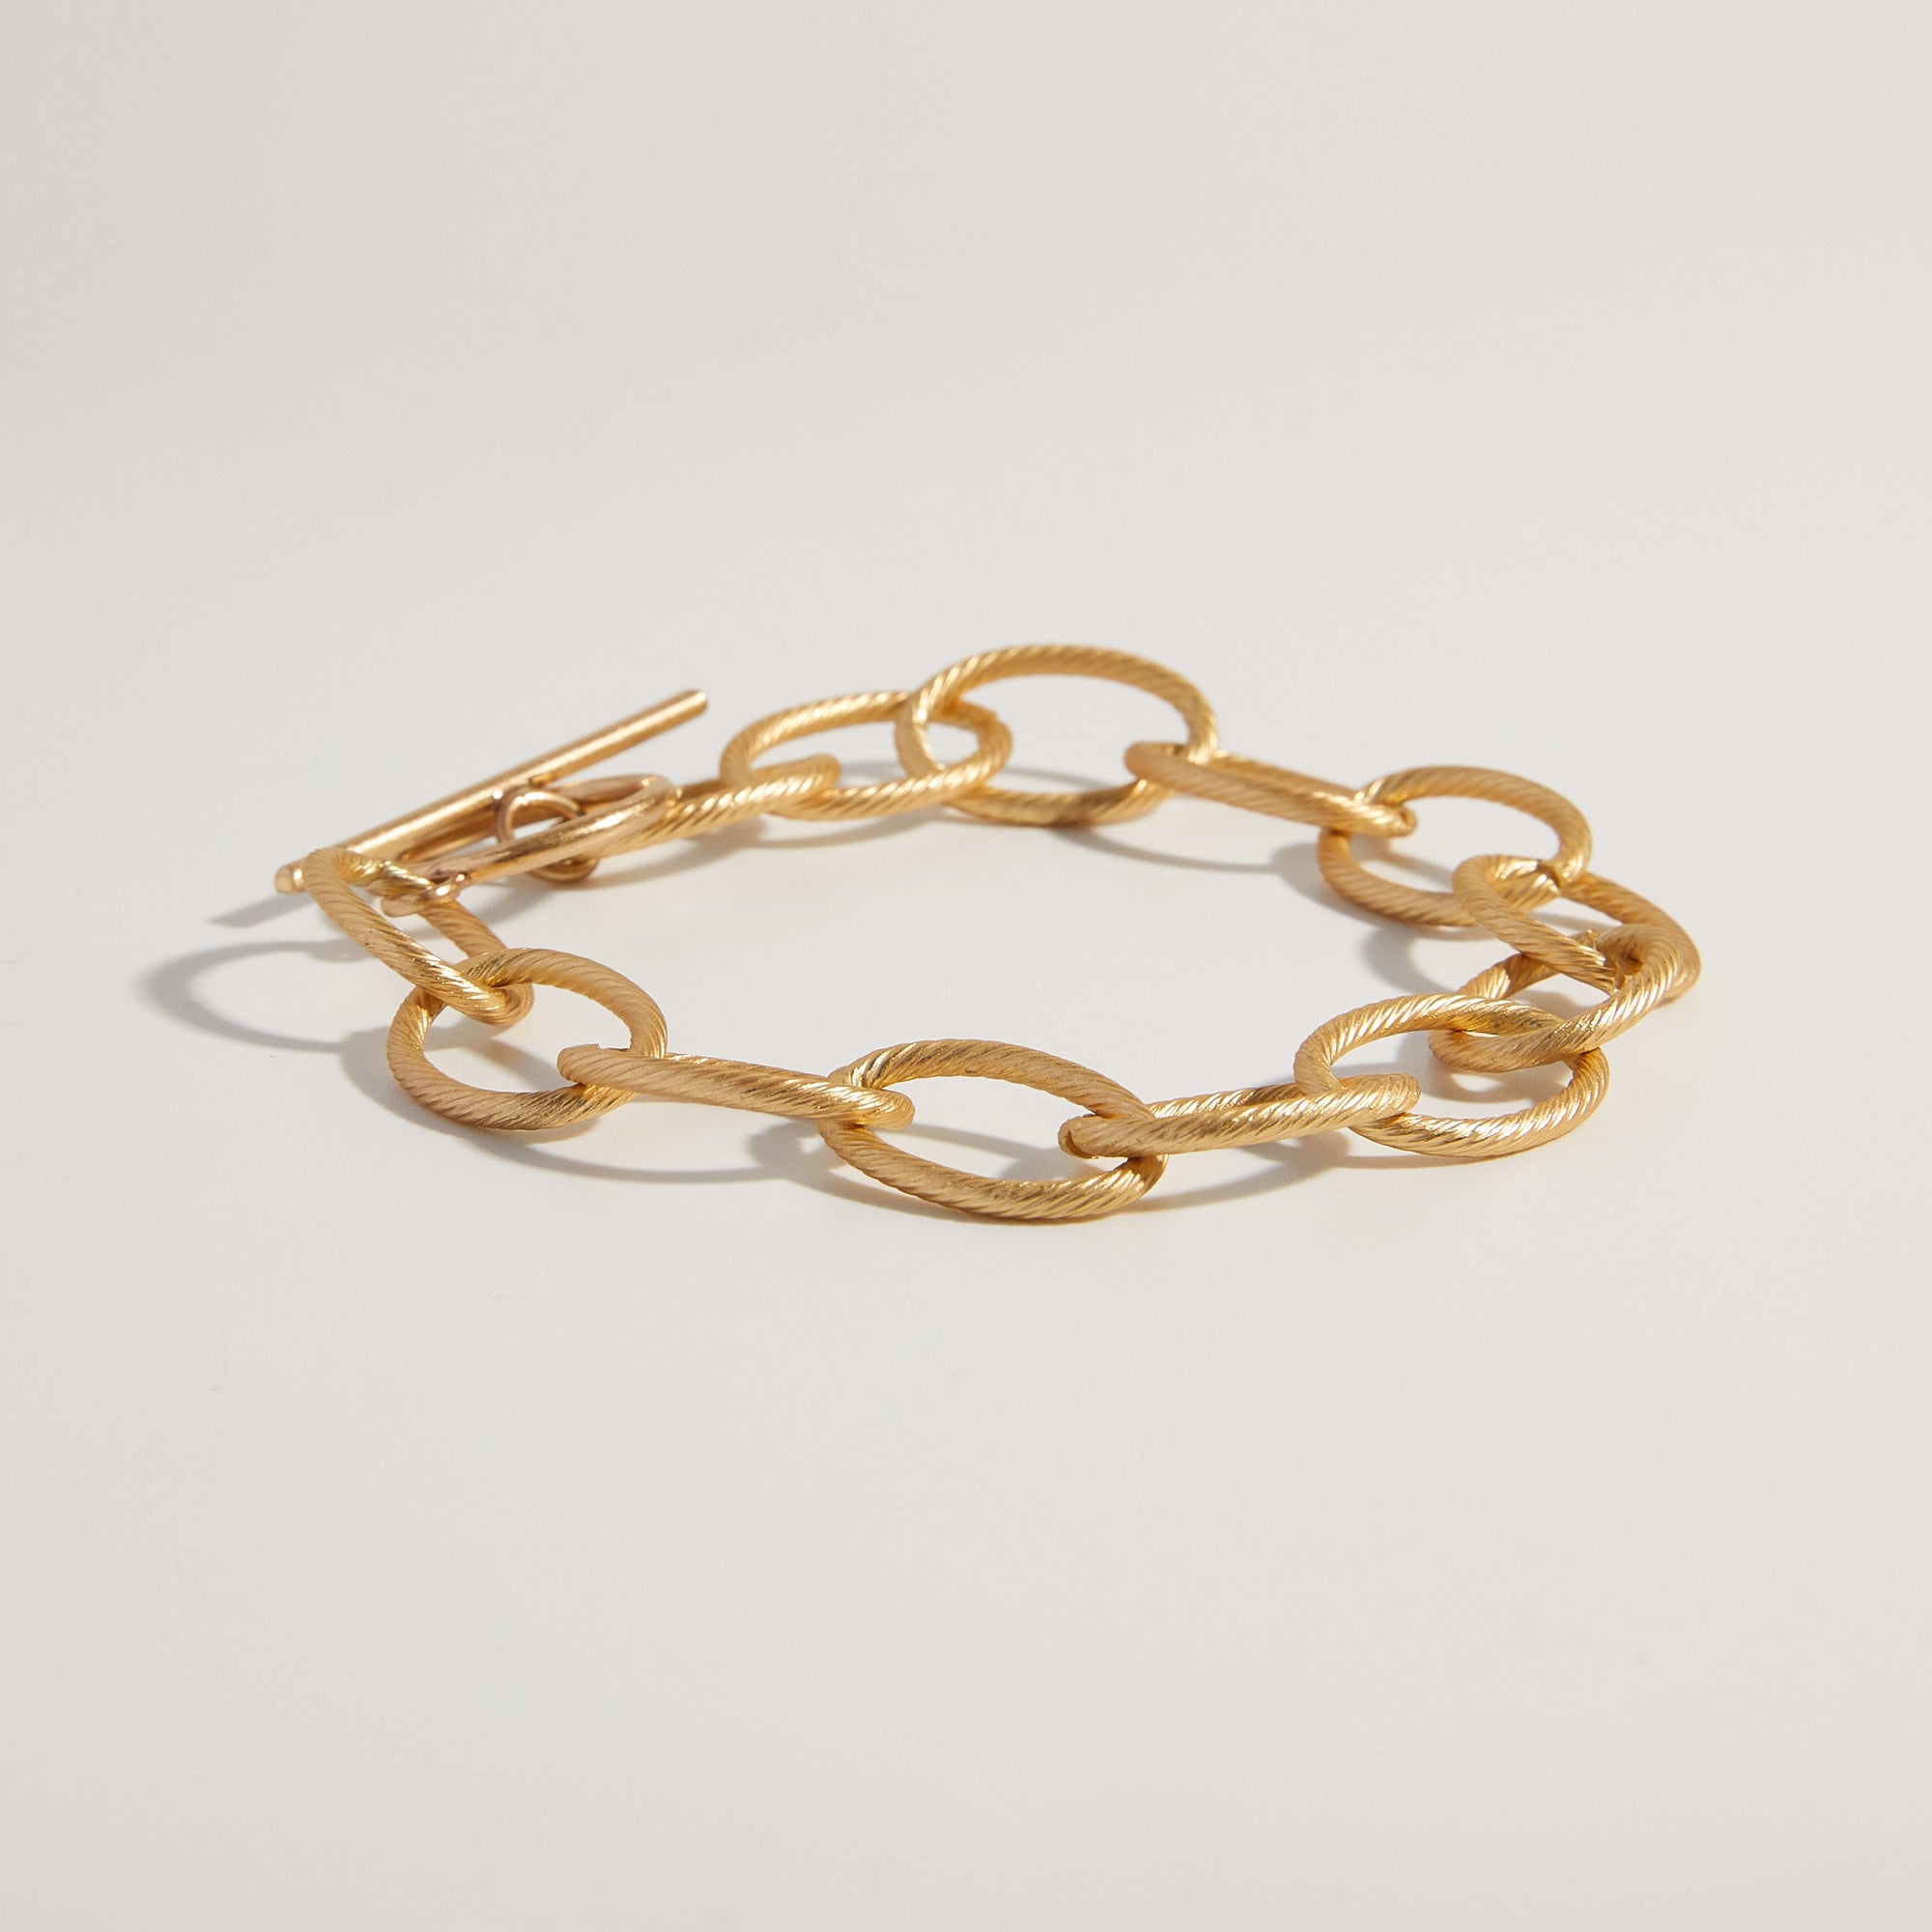 "L'Or" Chunky Gold Chain Bracelet